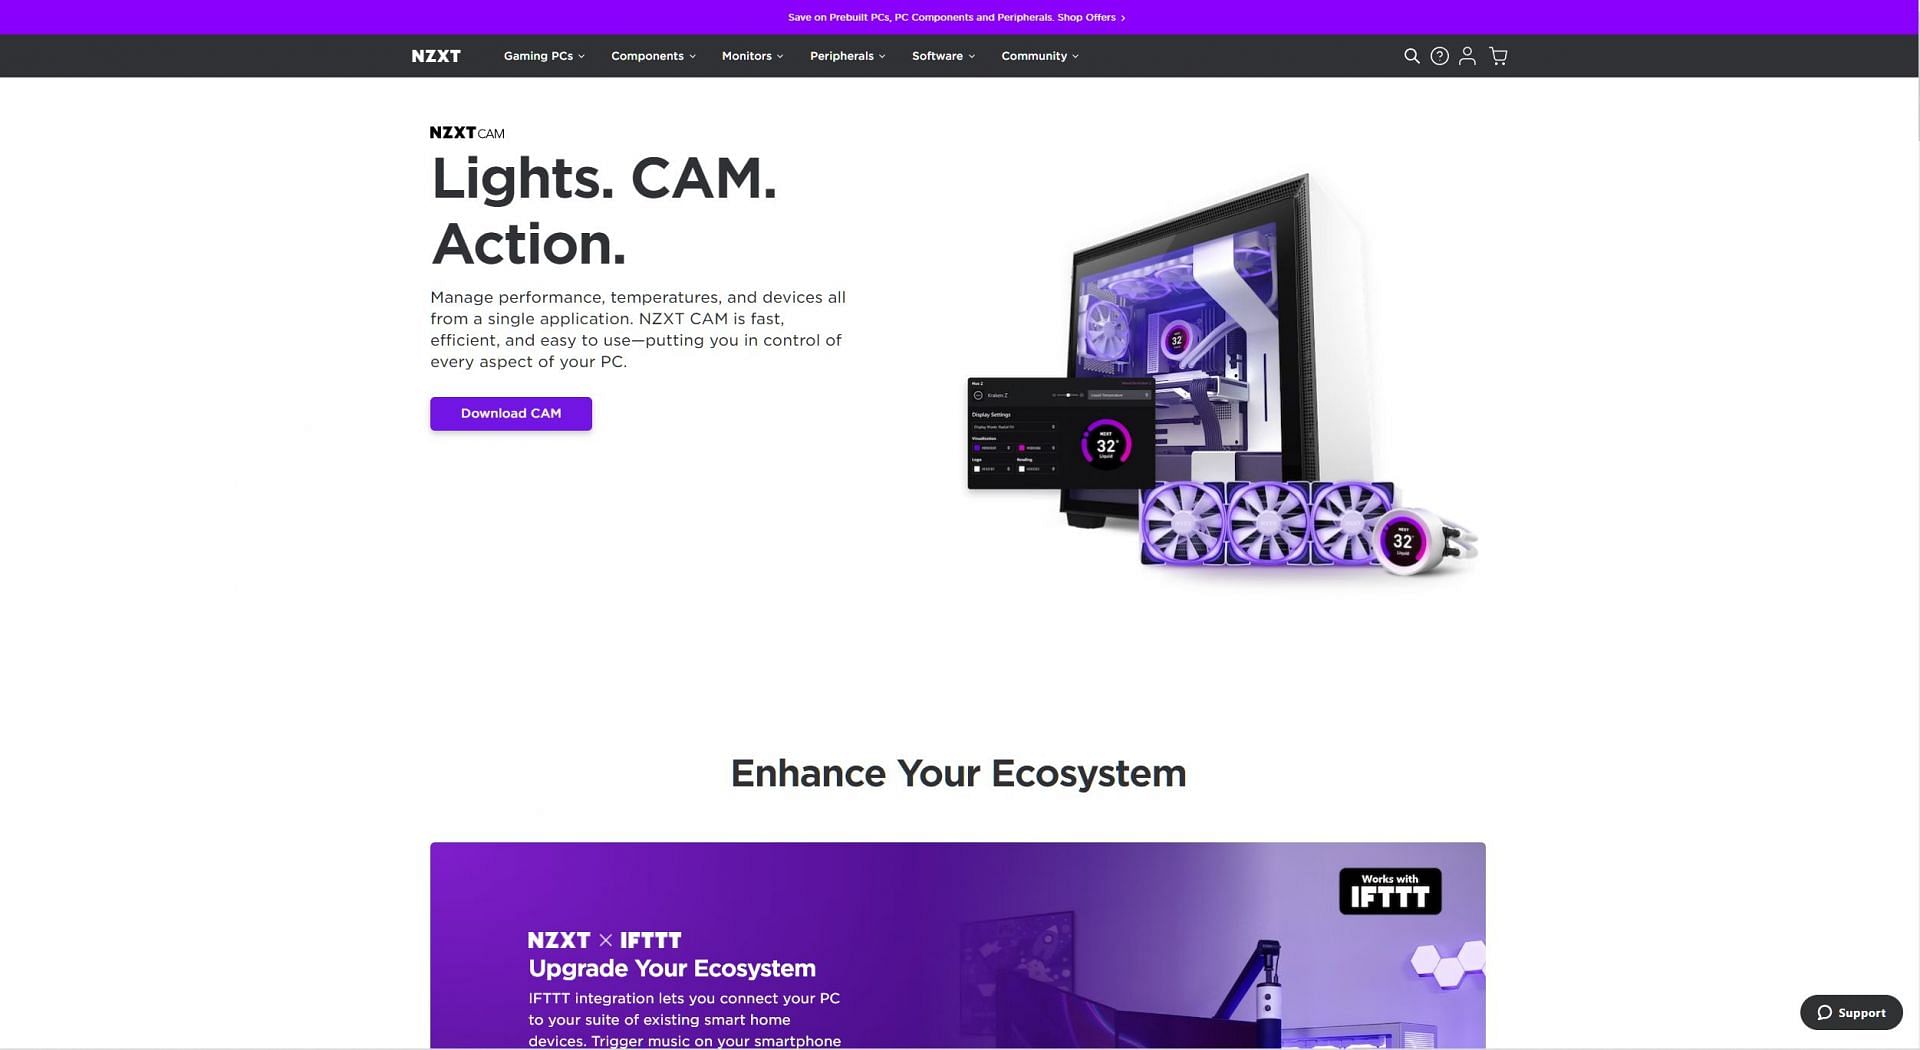 The NZXT Cam download page (Image via NZXT)